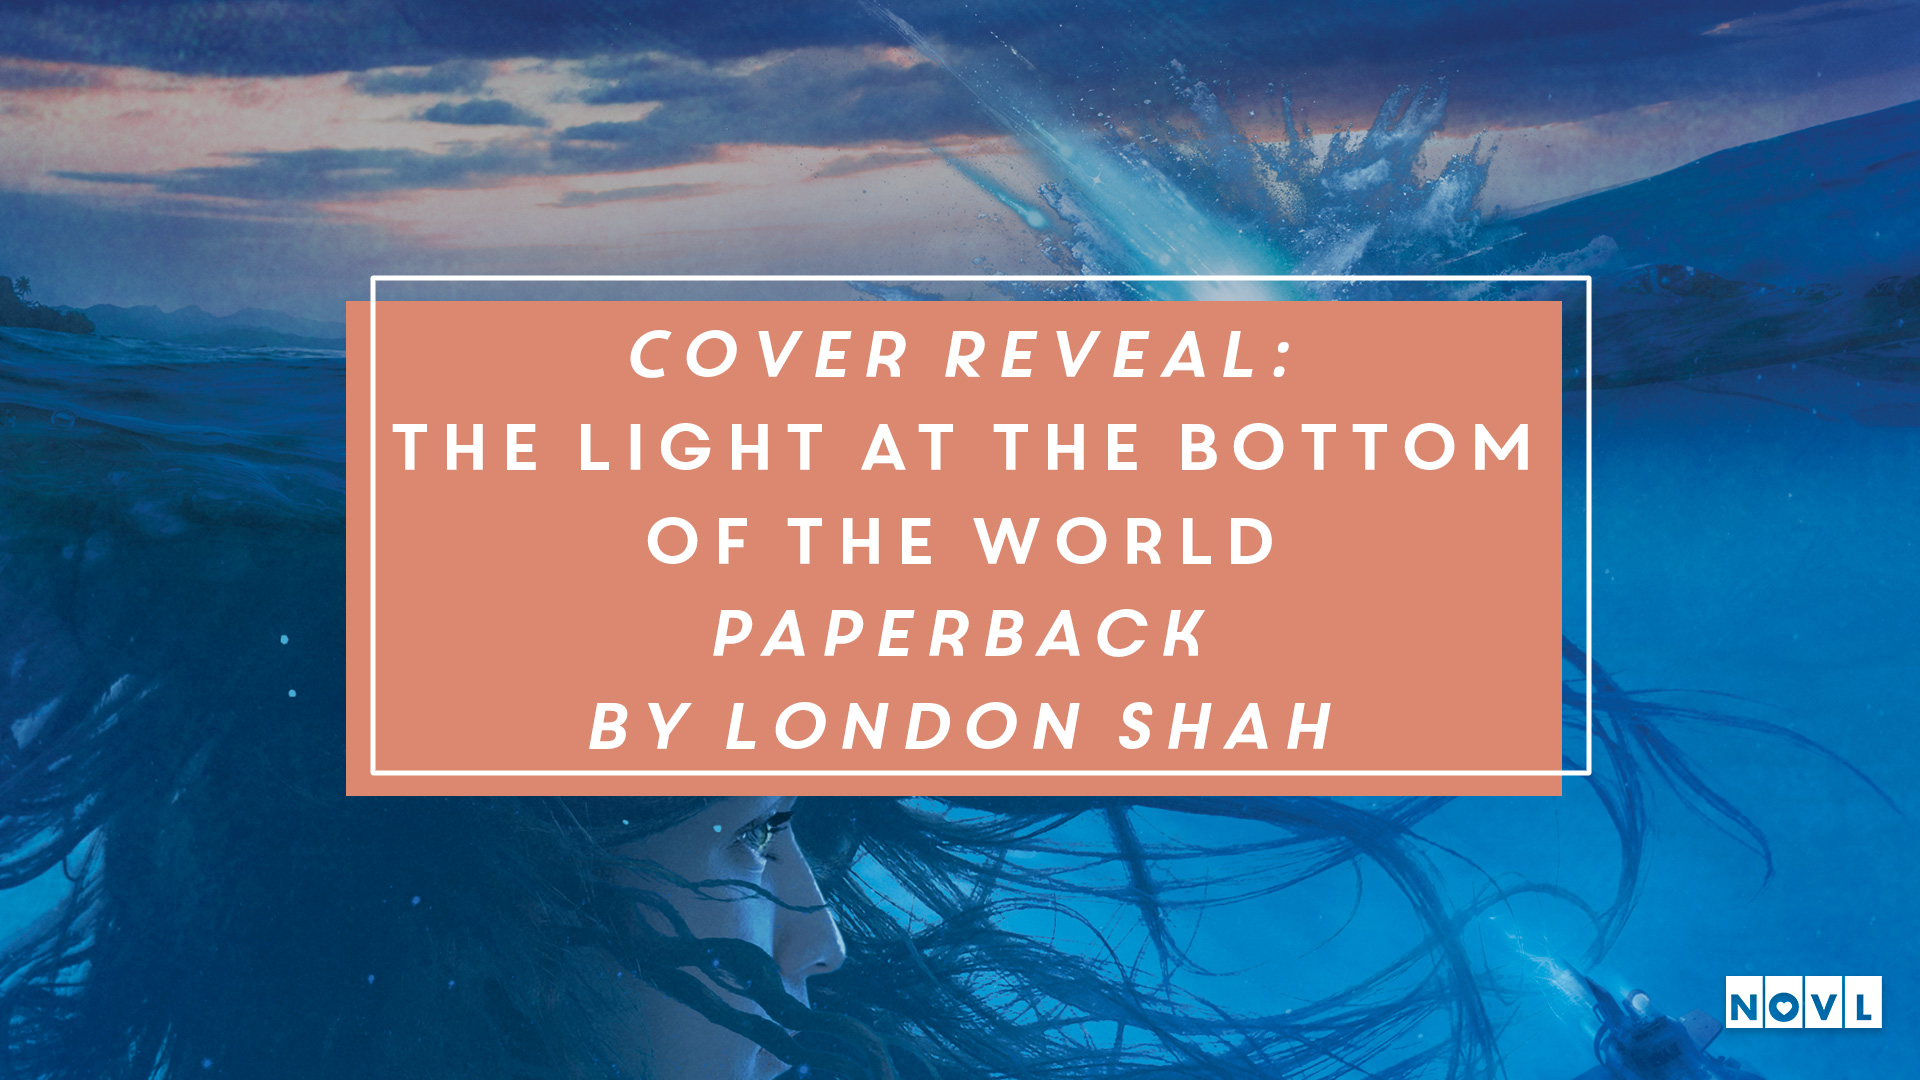 The NOVL Blog, Featured Image for Article: Cover Reveal: The Light at the Bottom of the World Paperback by London Shah